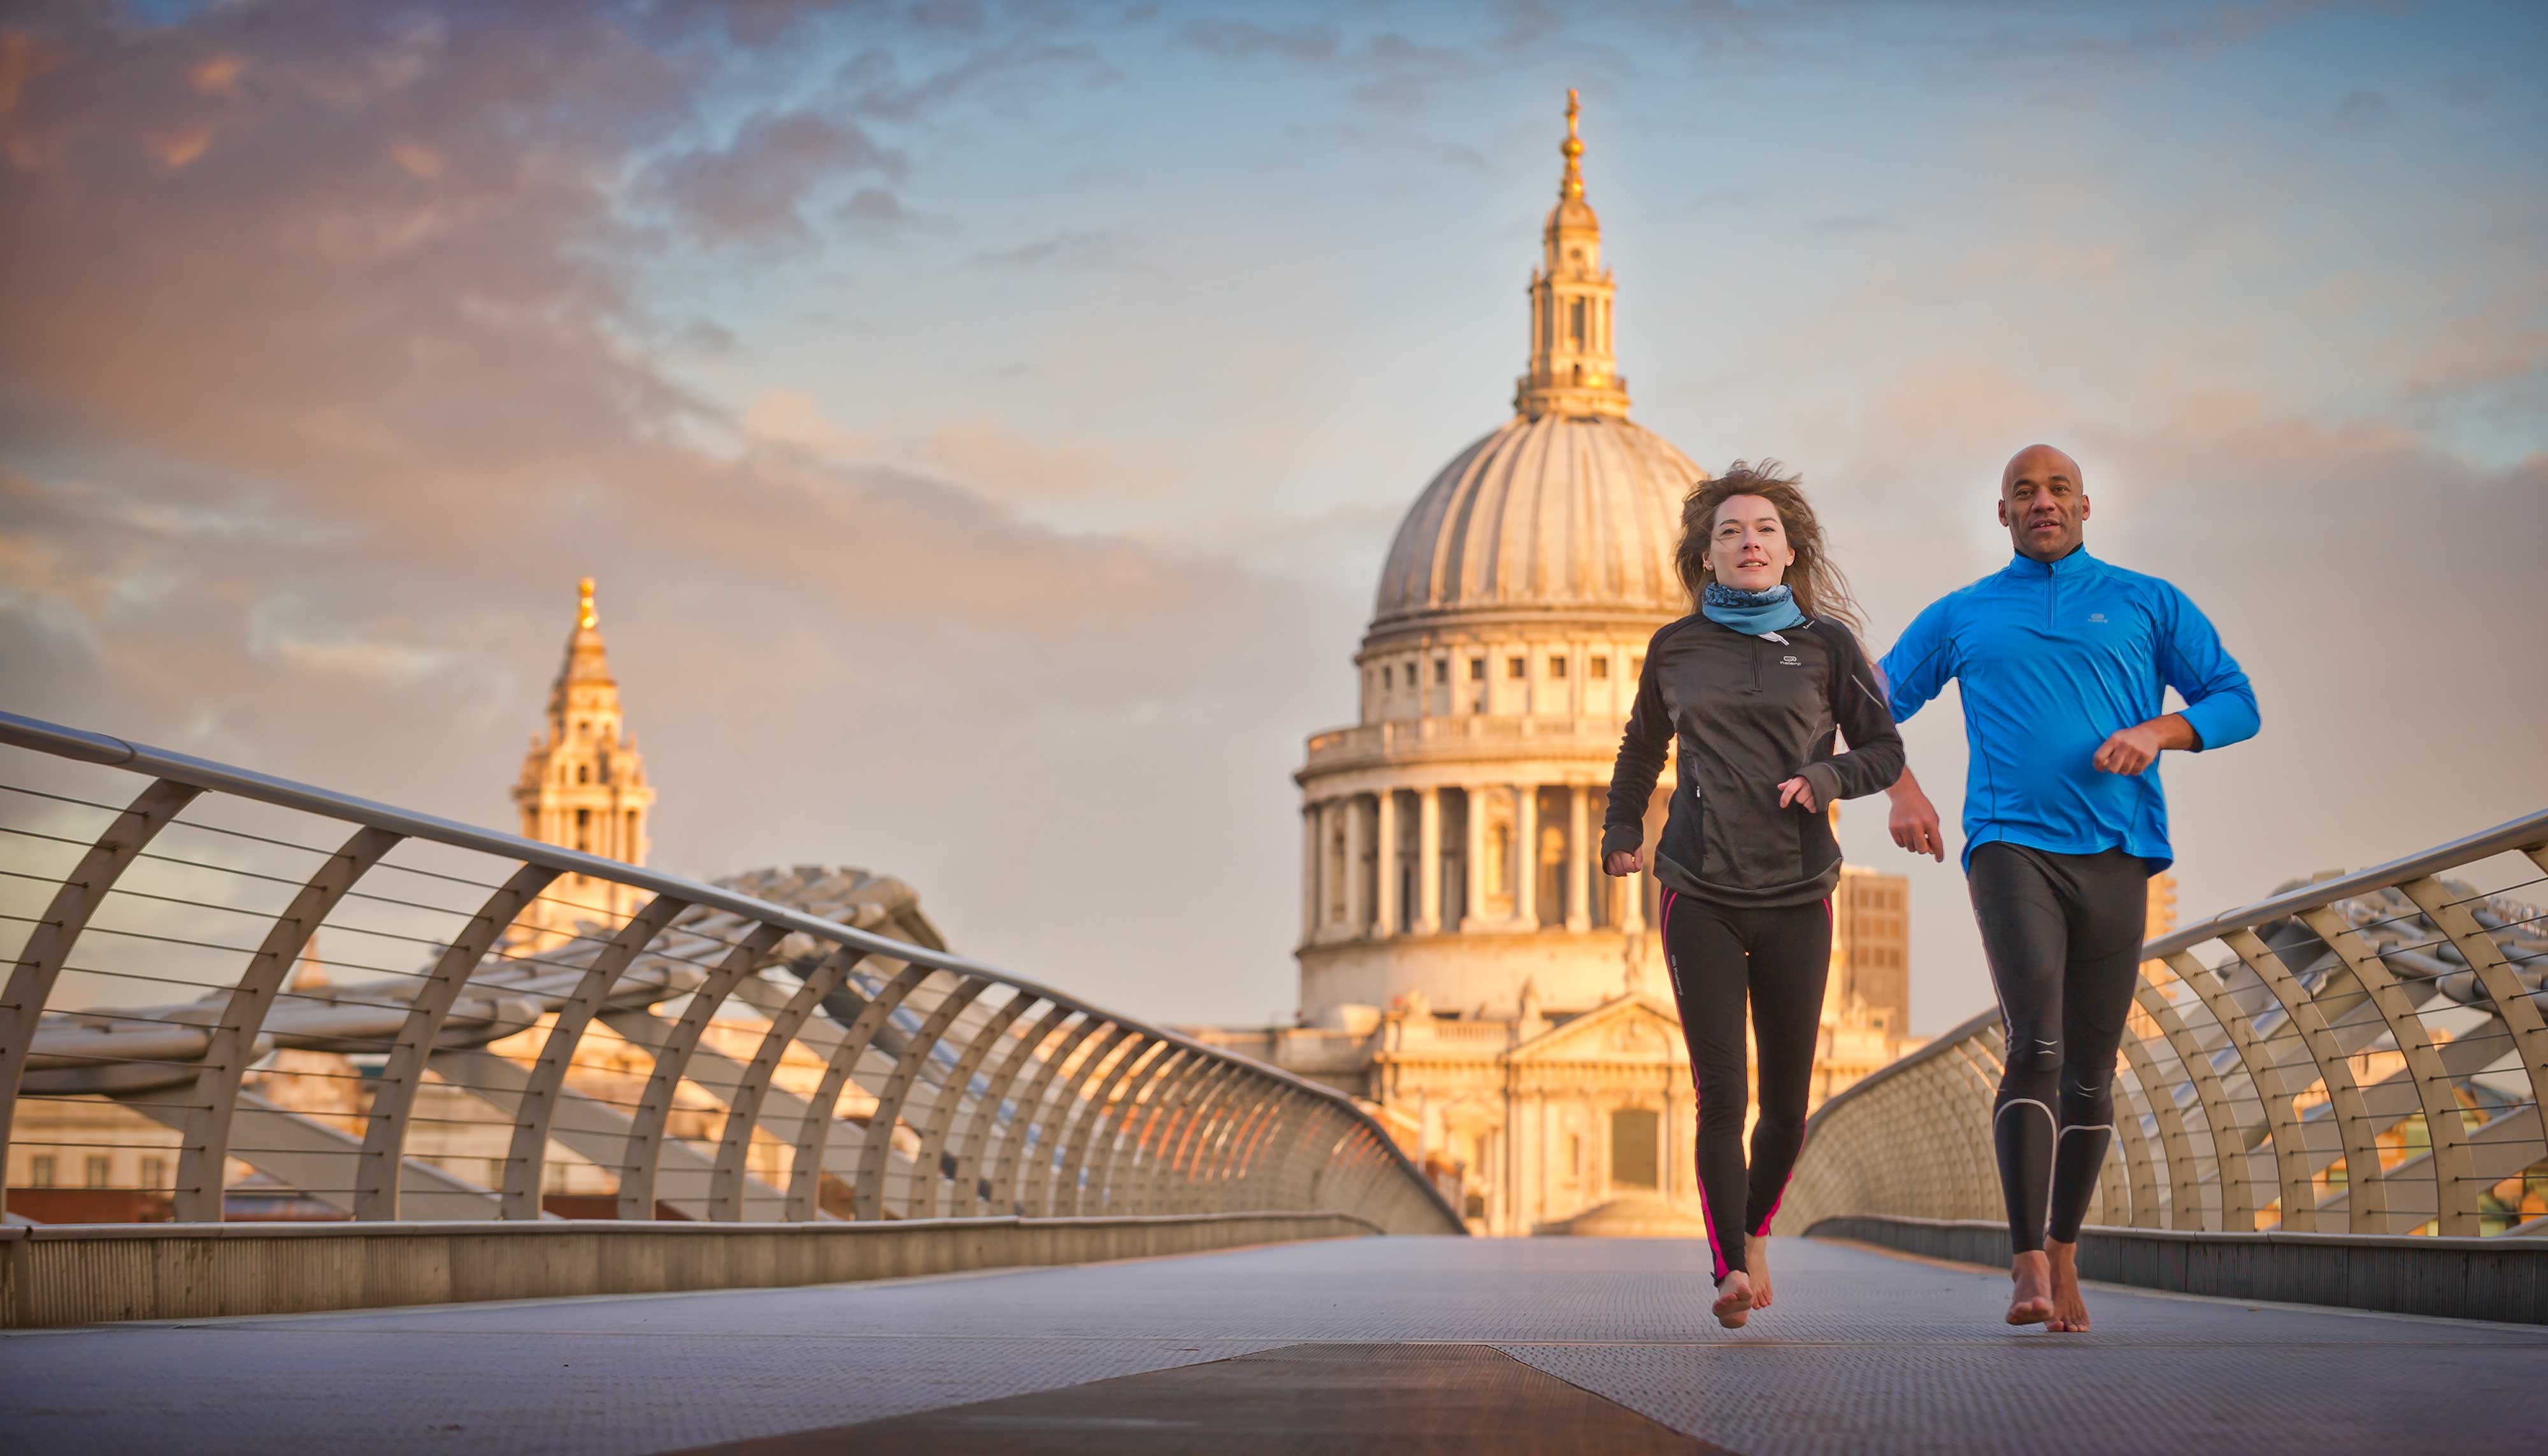 Commercial location photography of two runners in London